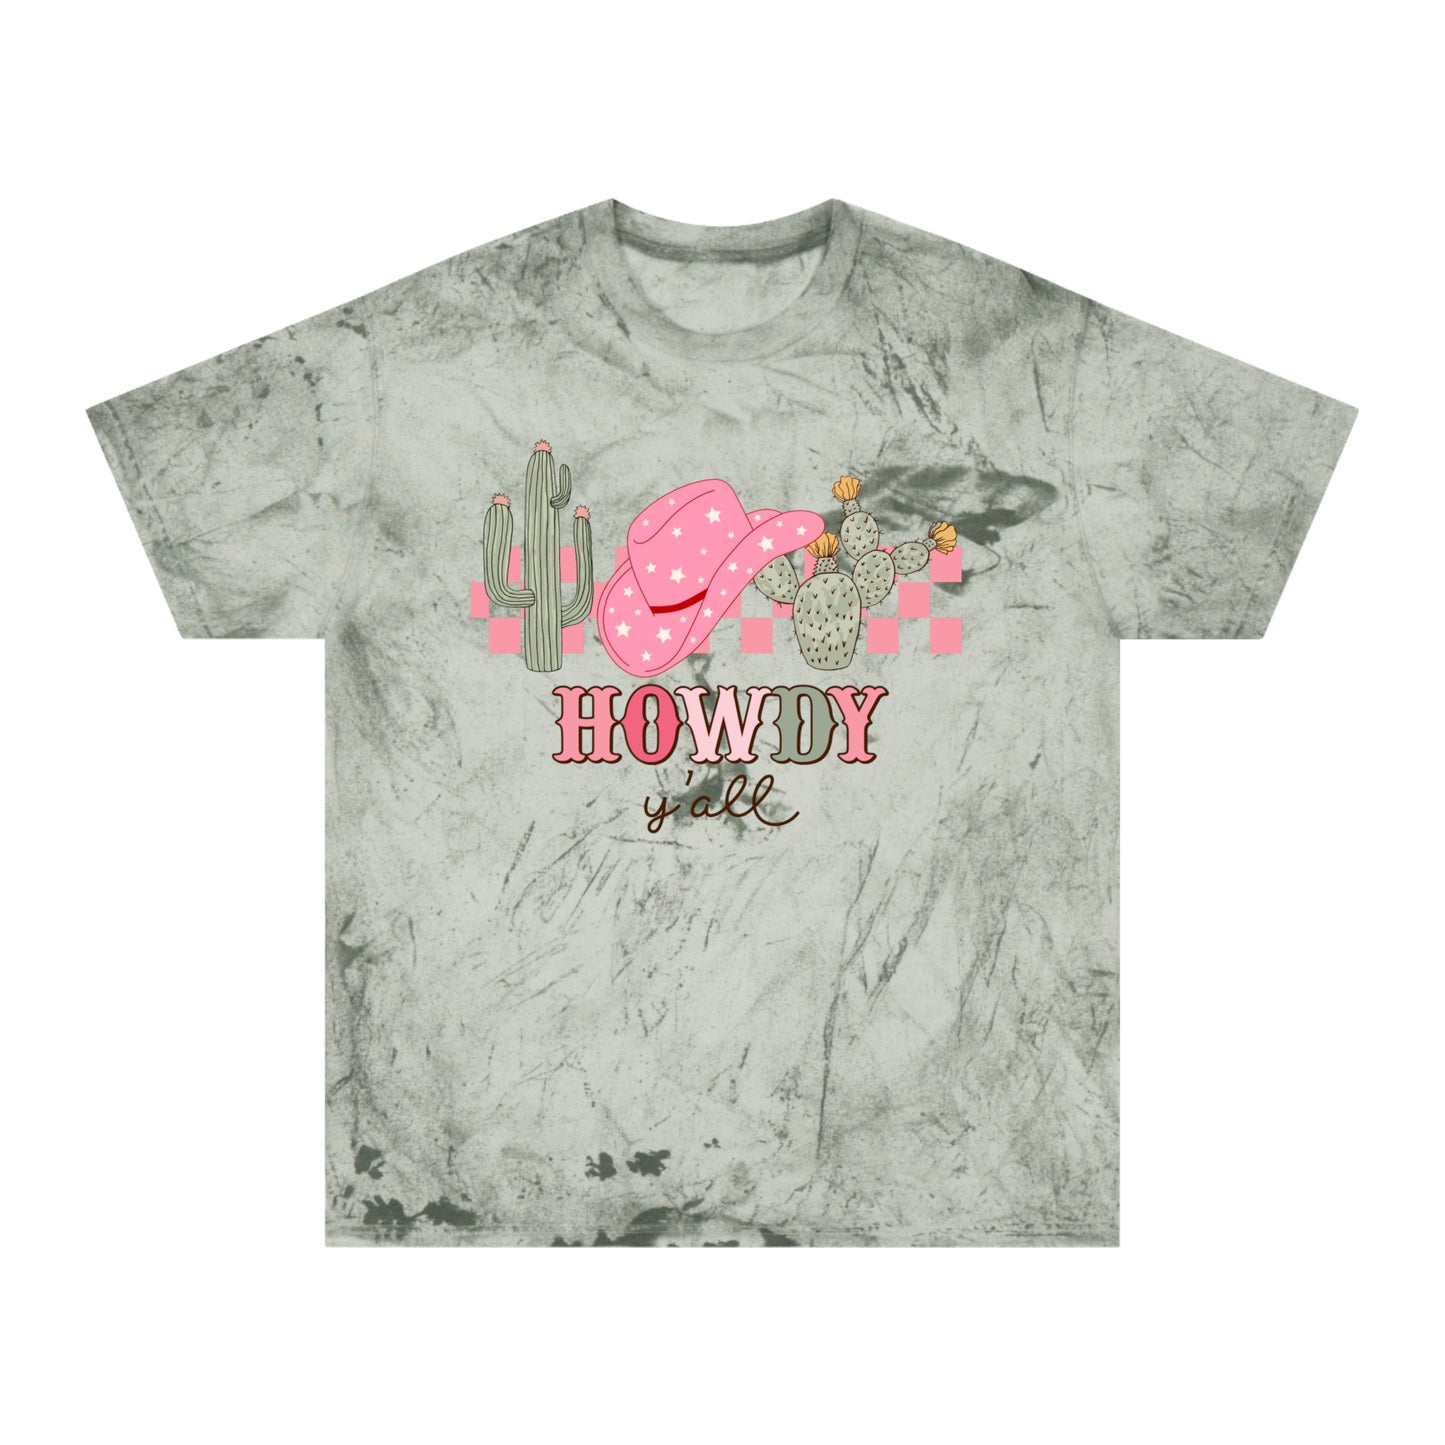 Howdy Y'all T-Shirt, Howdy T-Shirt With Cactus, Western T-Shirt, Howdy Shirt, Western Shirt, Howdy Y'all, Gifts For Her, Gift for Friend